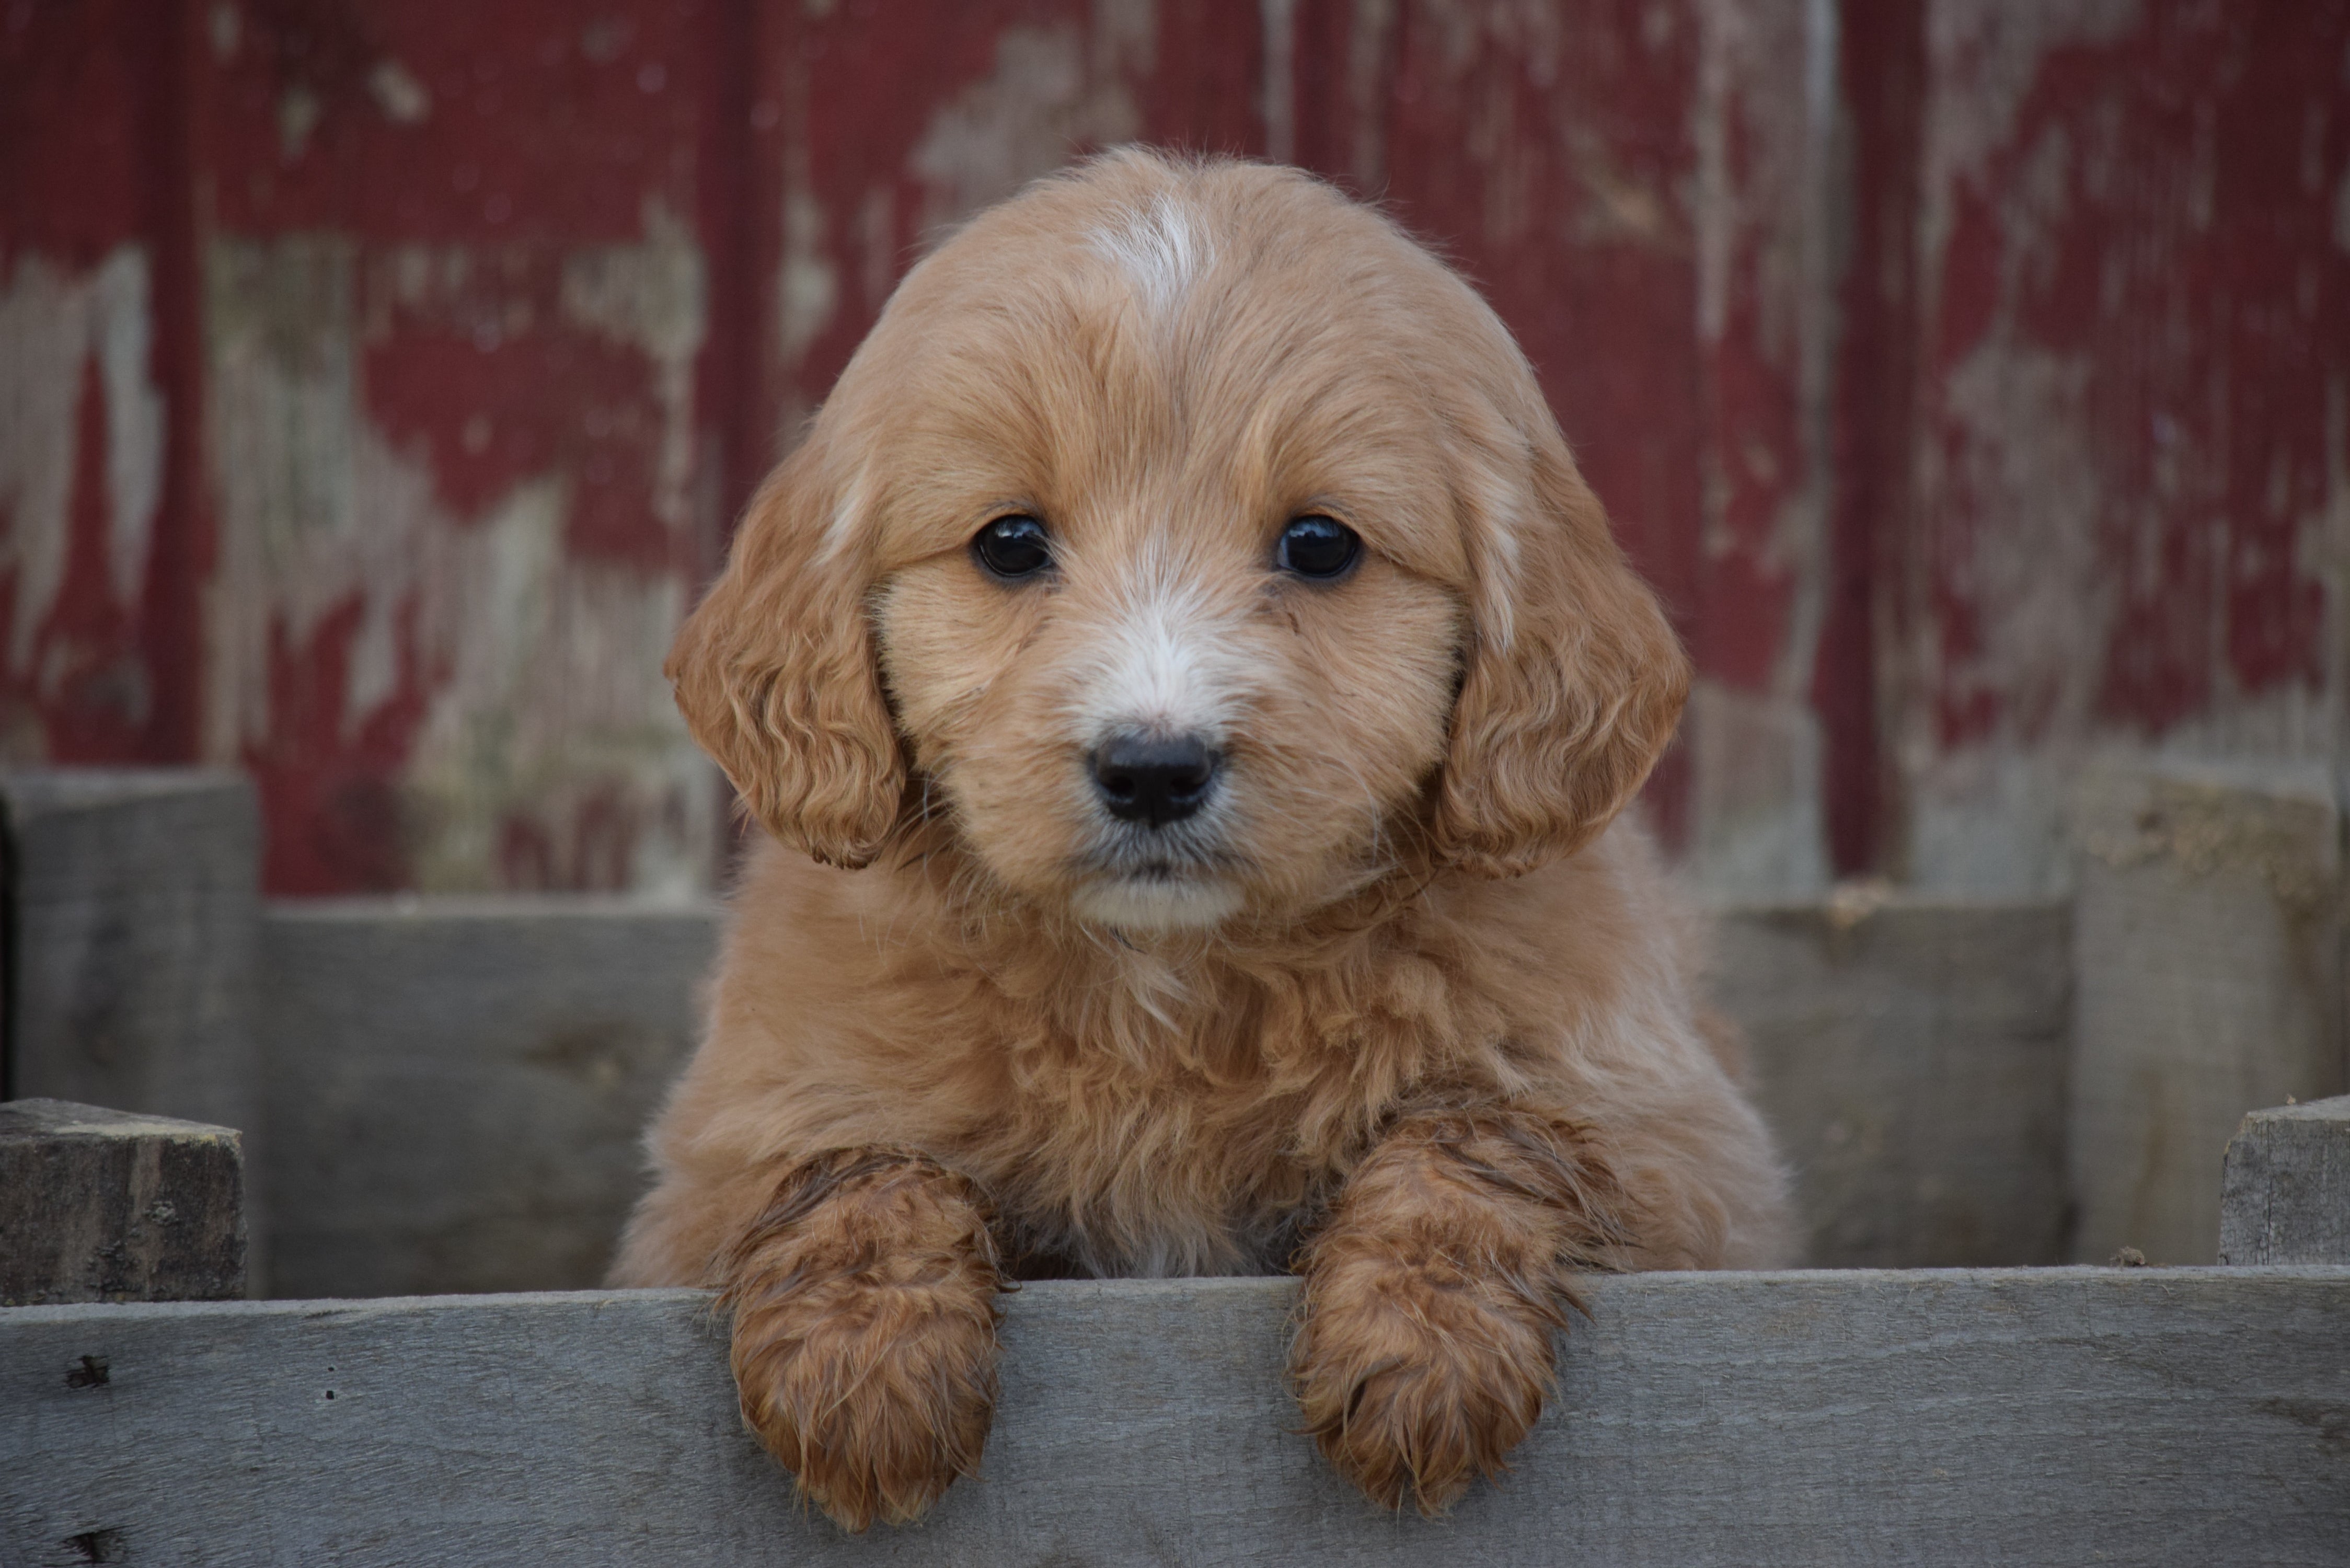 Goldendoodle Puppies for Sale Under $1000 - wide 2